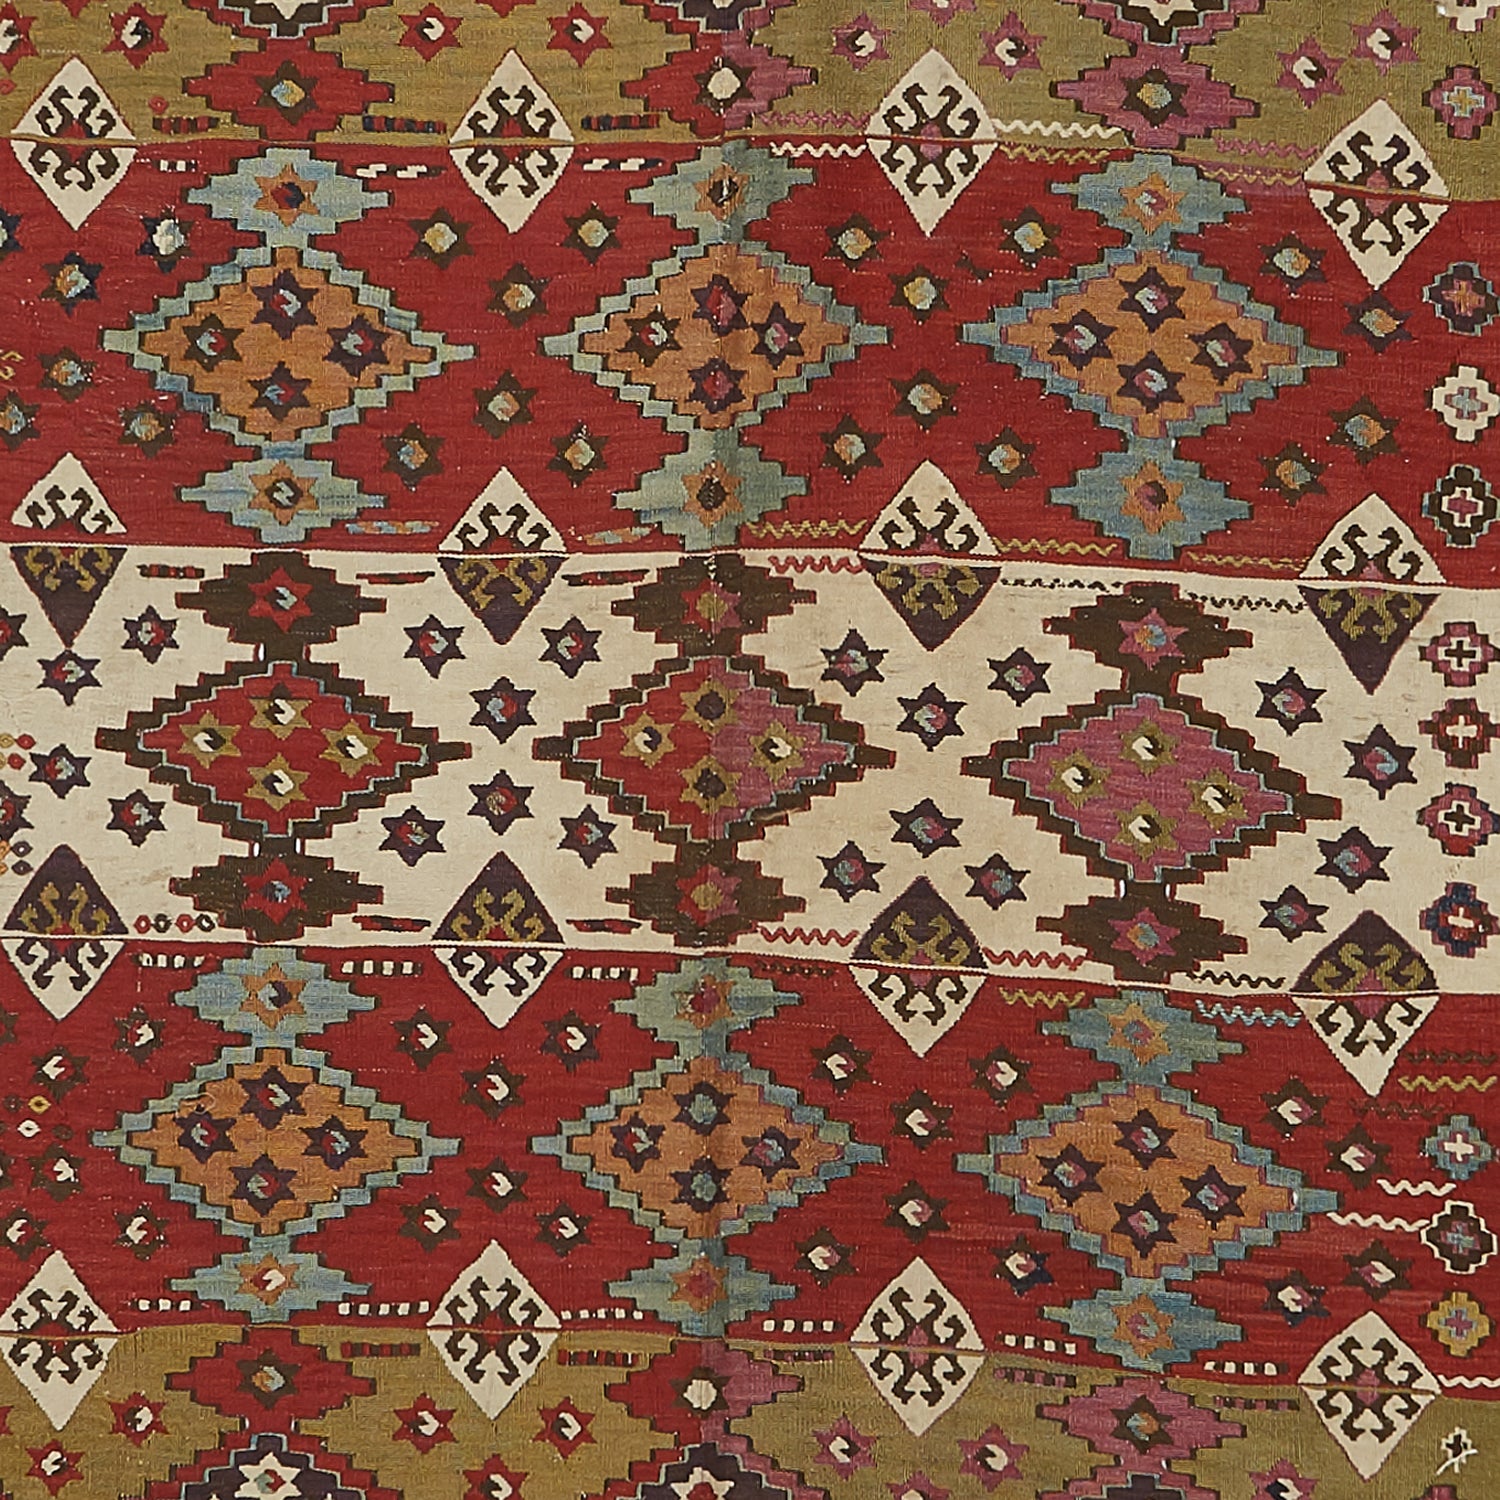 Richly patterned rug showcases intricate geometric design in warm hues.